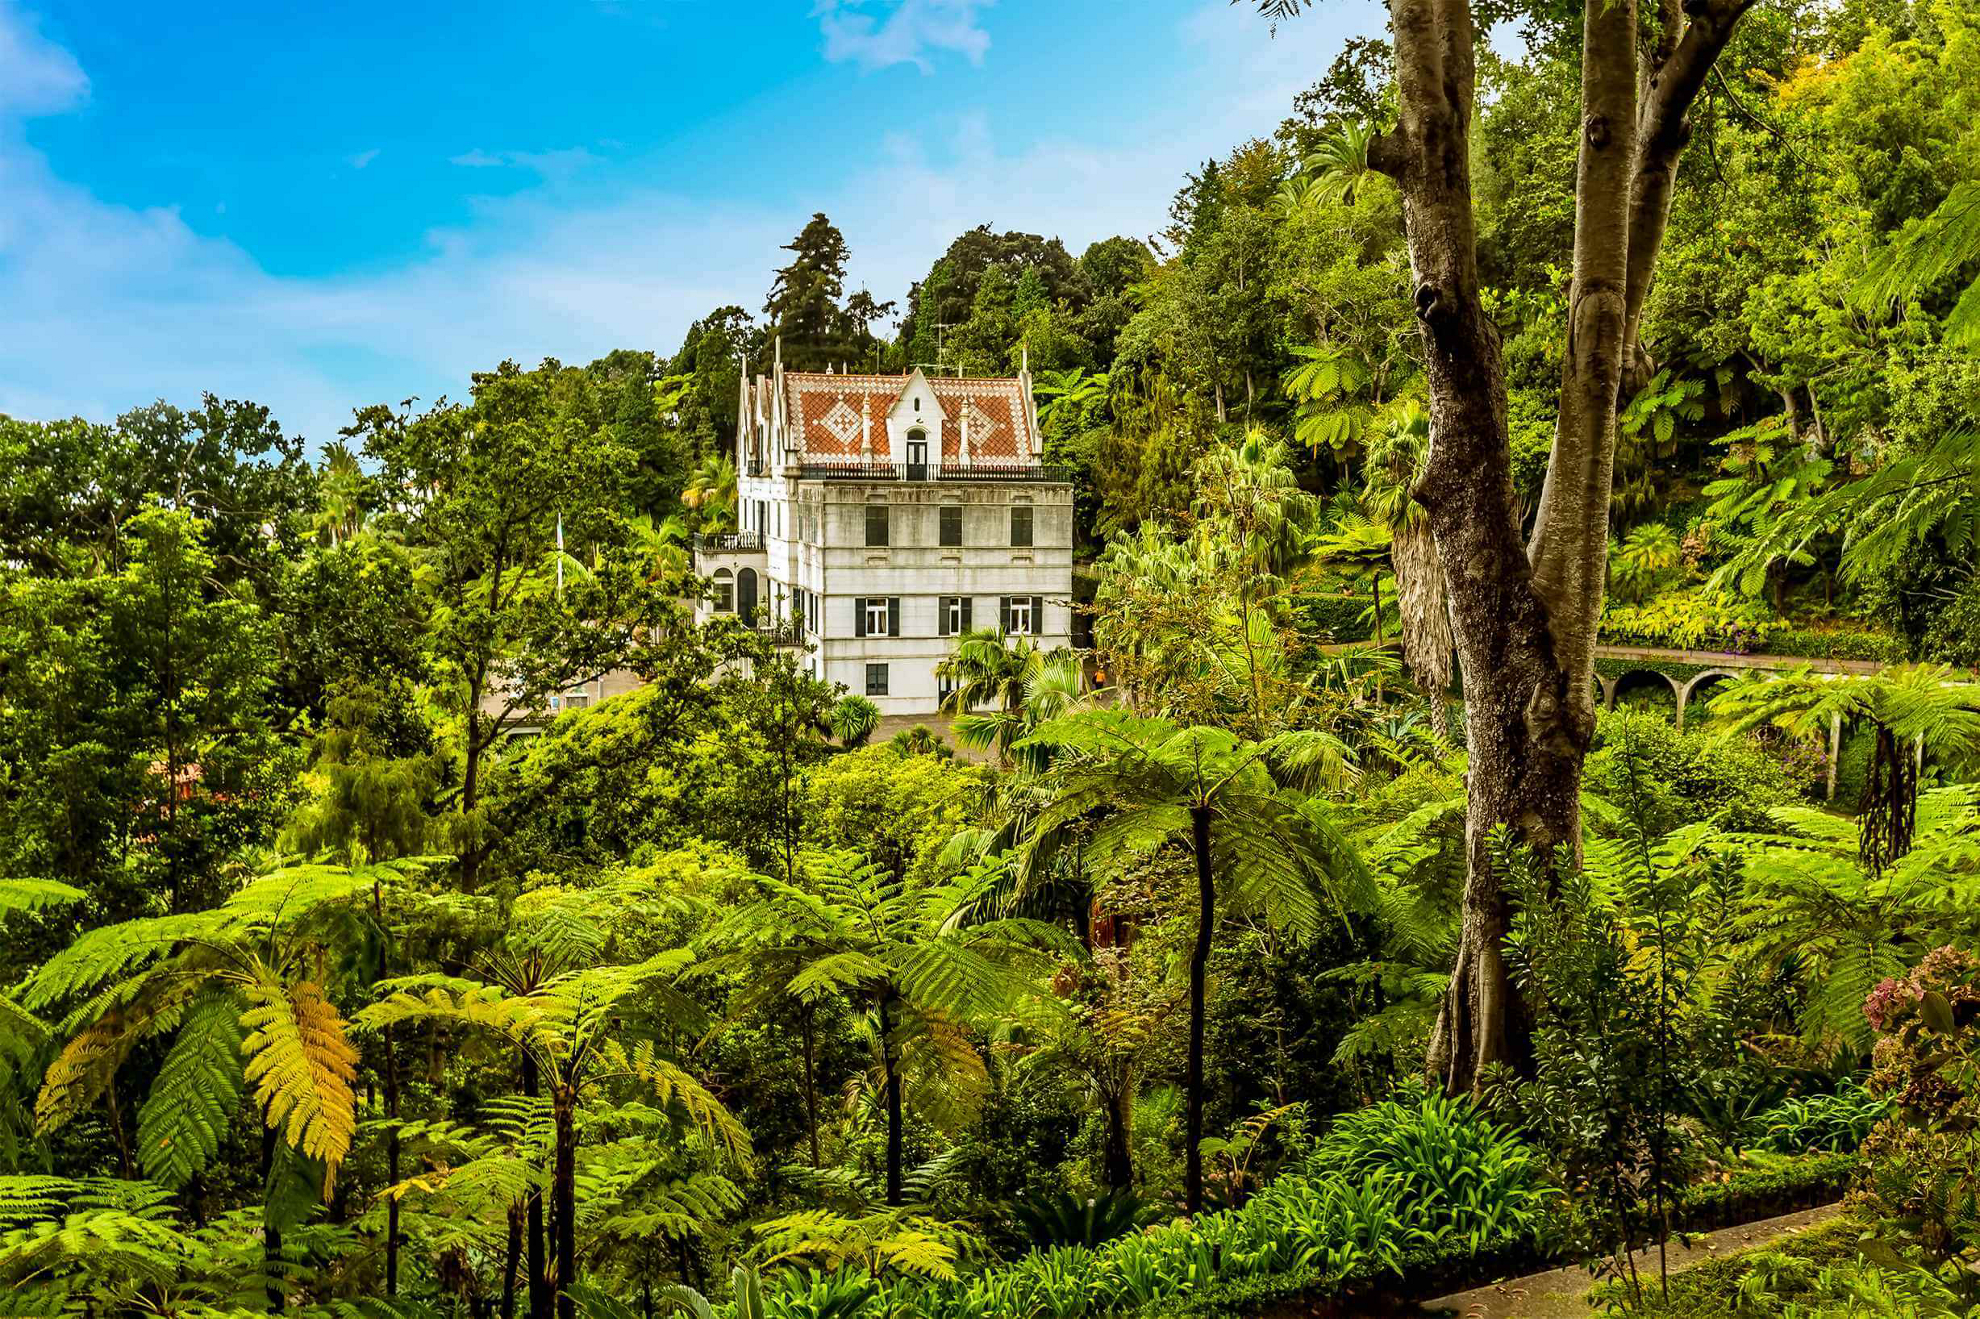 Top holiday destinations: An emblematic house surrounded by greenery